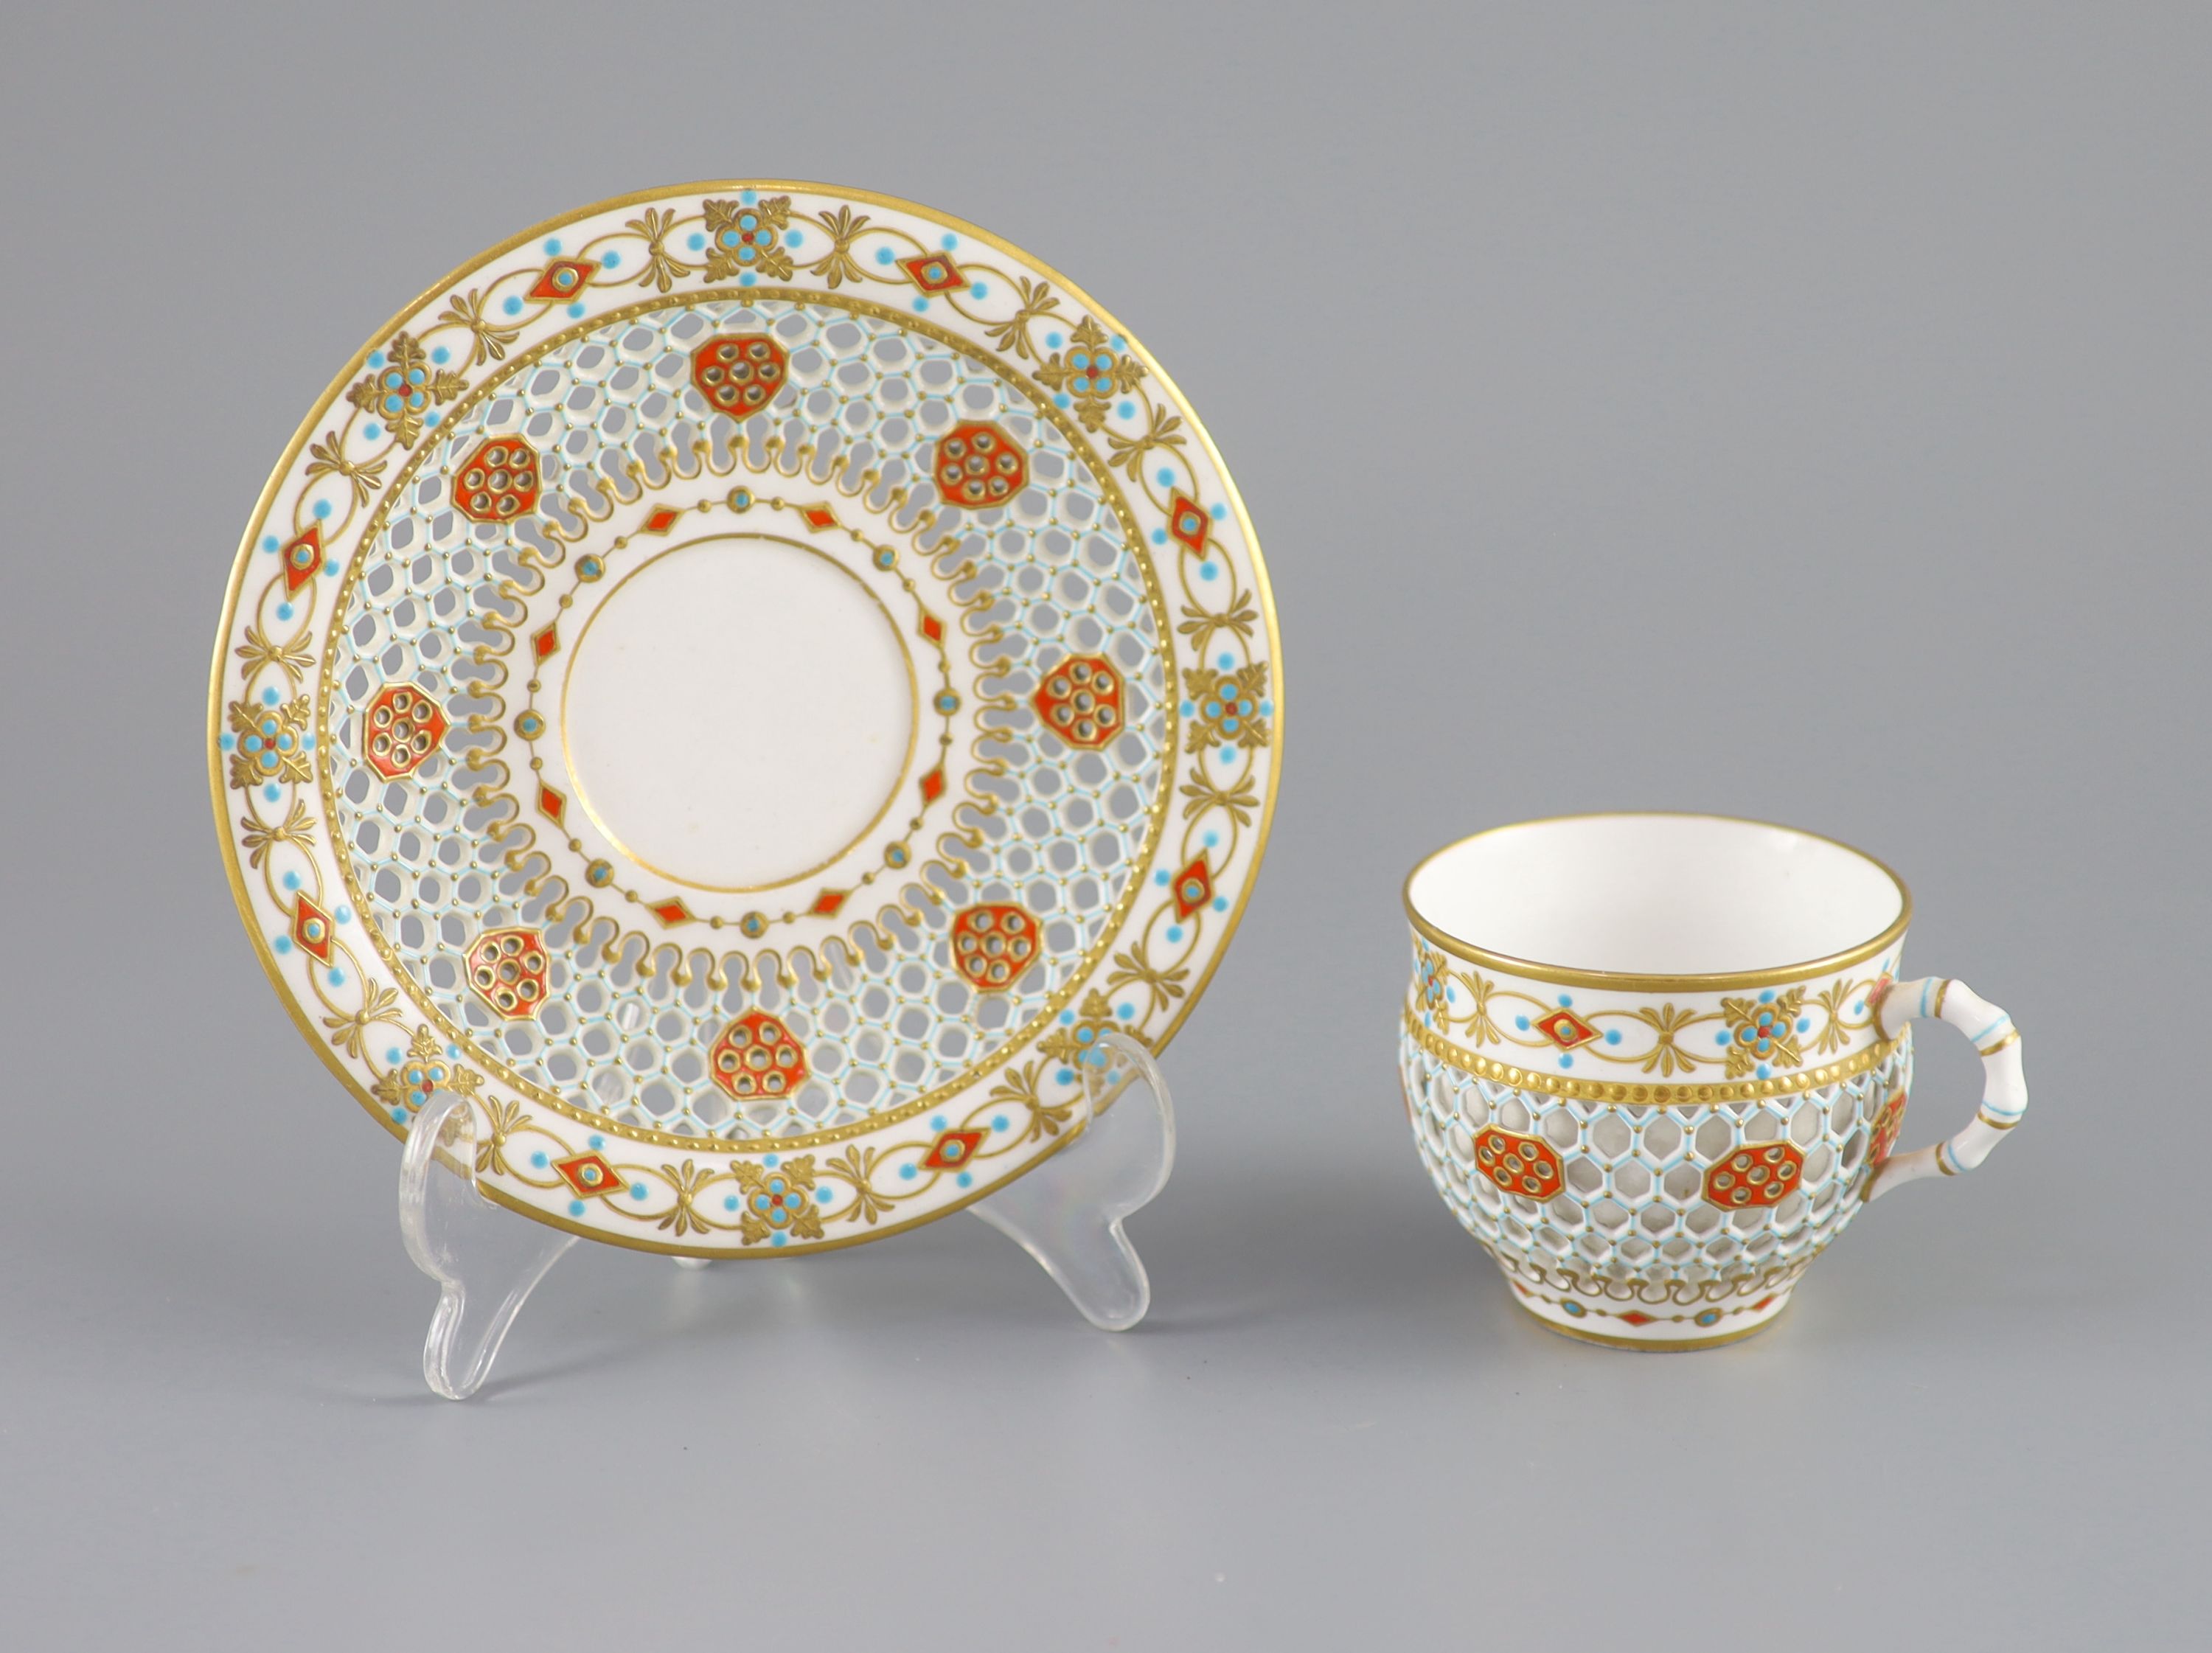 A Royal Worcester 'jewelled' and reticulated cup and saucer